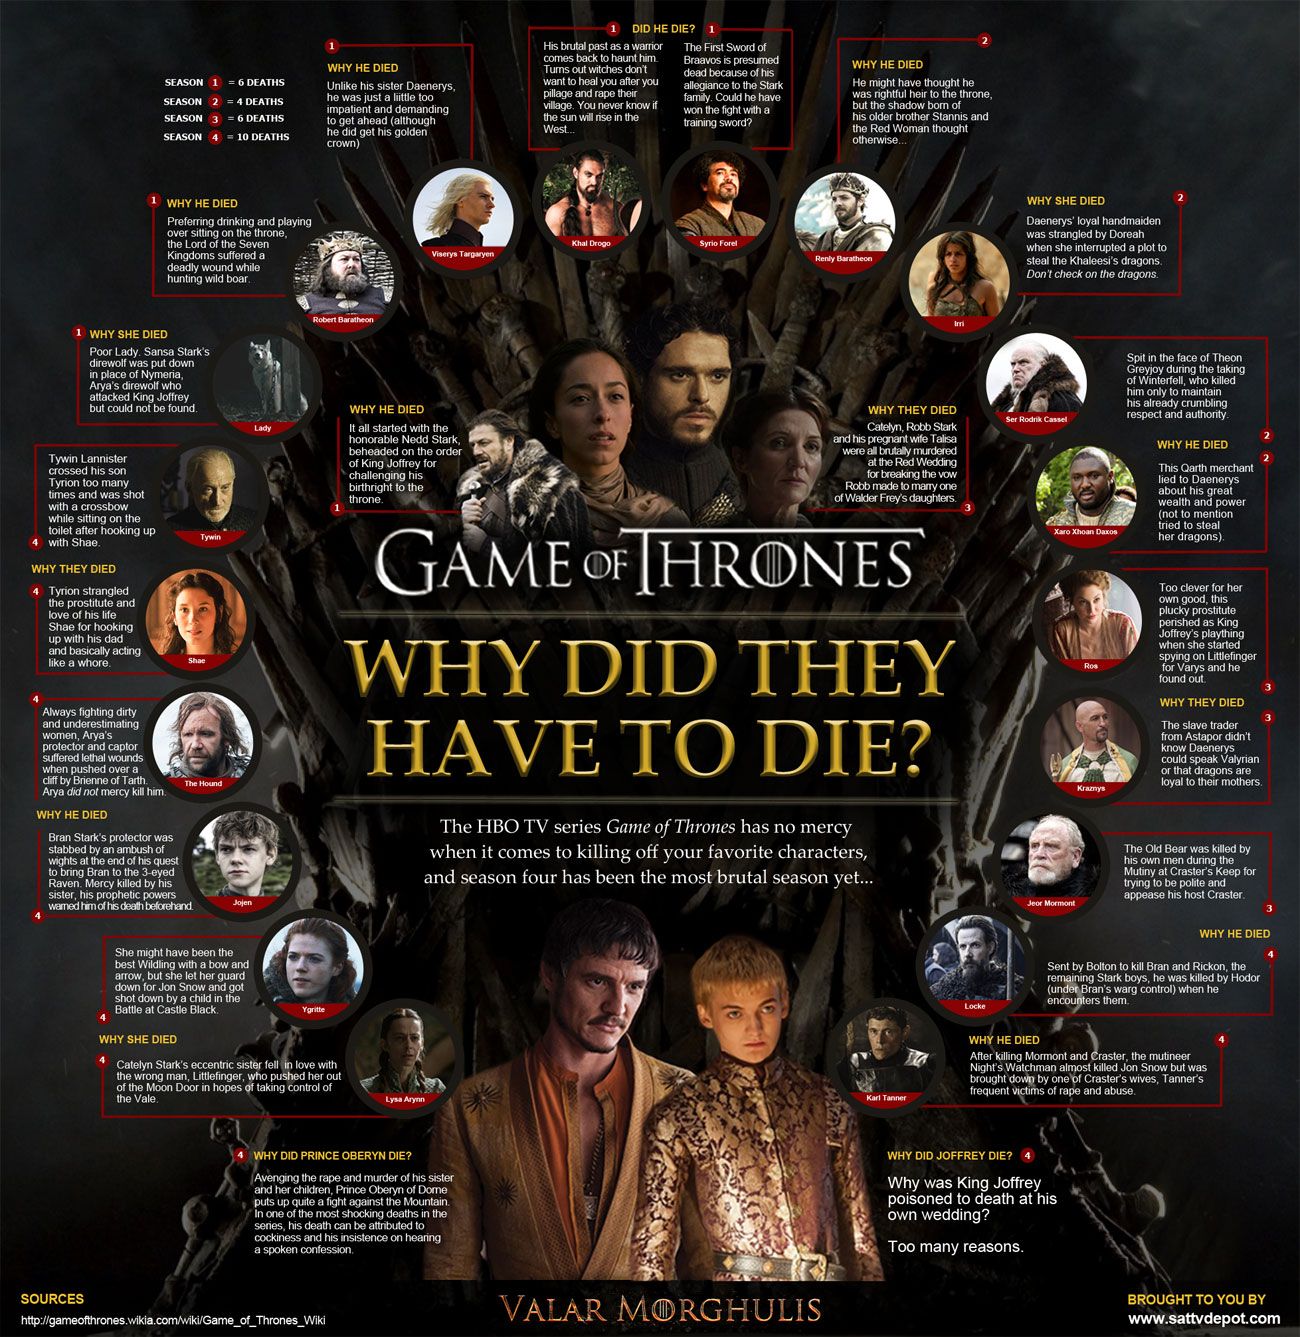 Why Did They Have to Die? ‘Game of Thrones’ Infographic Shows Why Some Beloved Characters Had to Go